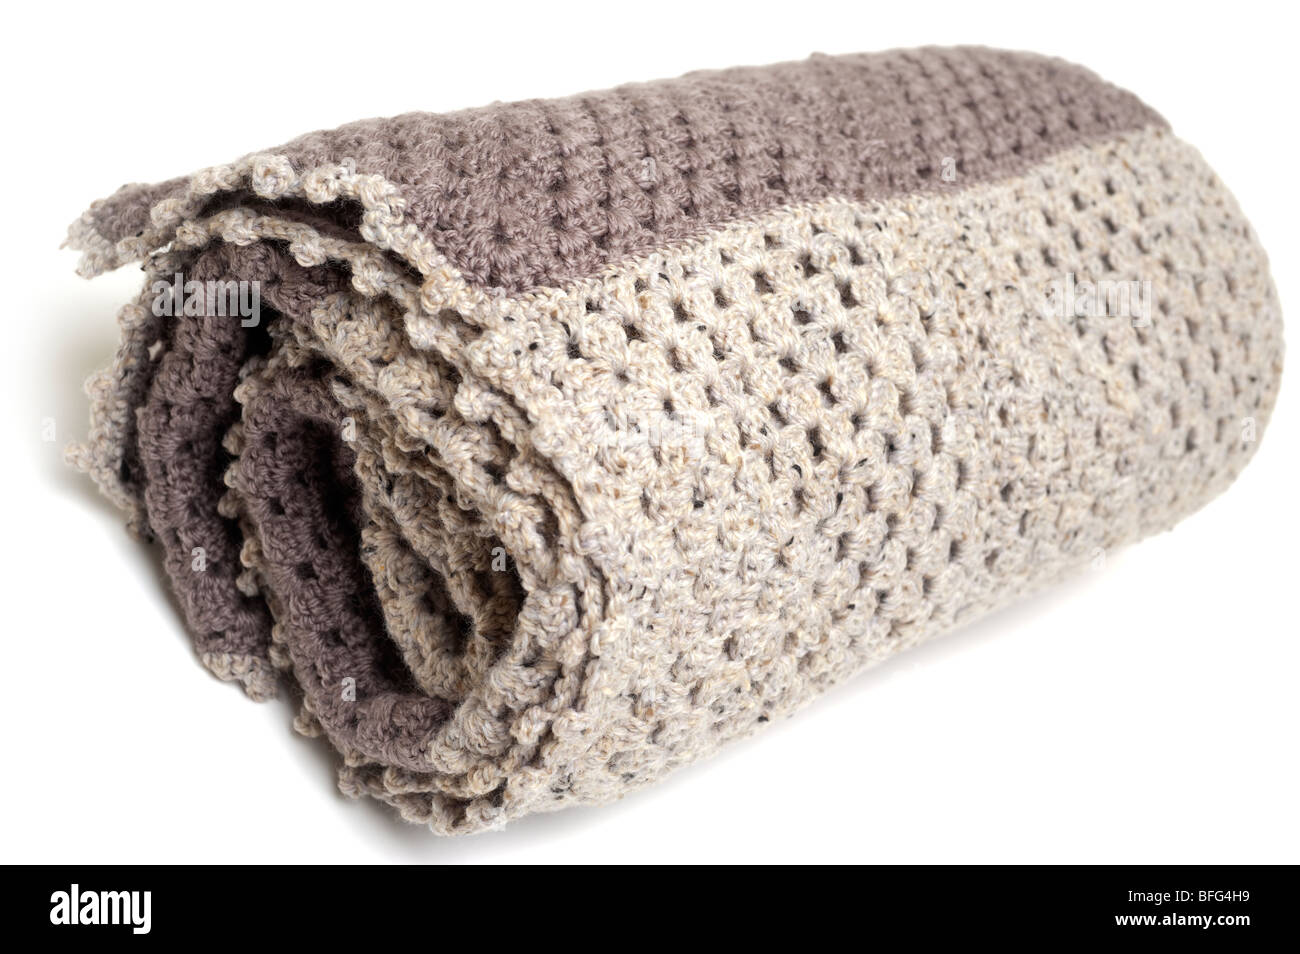 Brown and beige coloured crocheted blanket Stock Photo